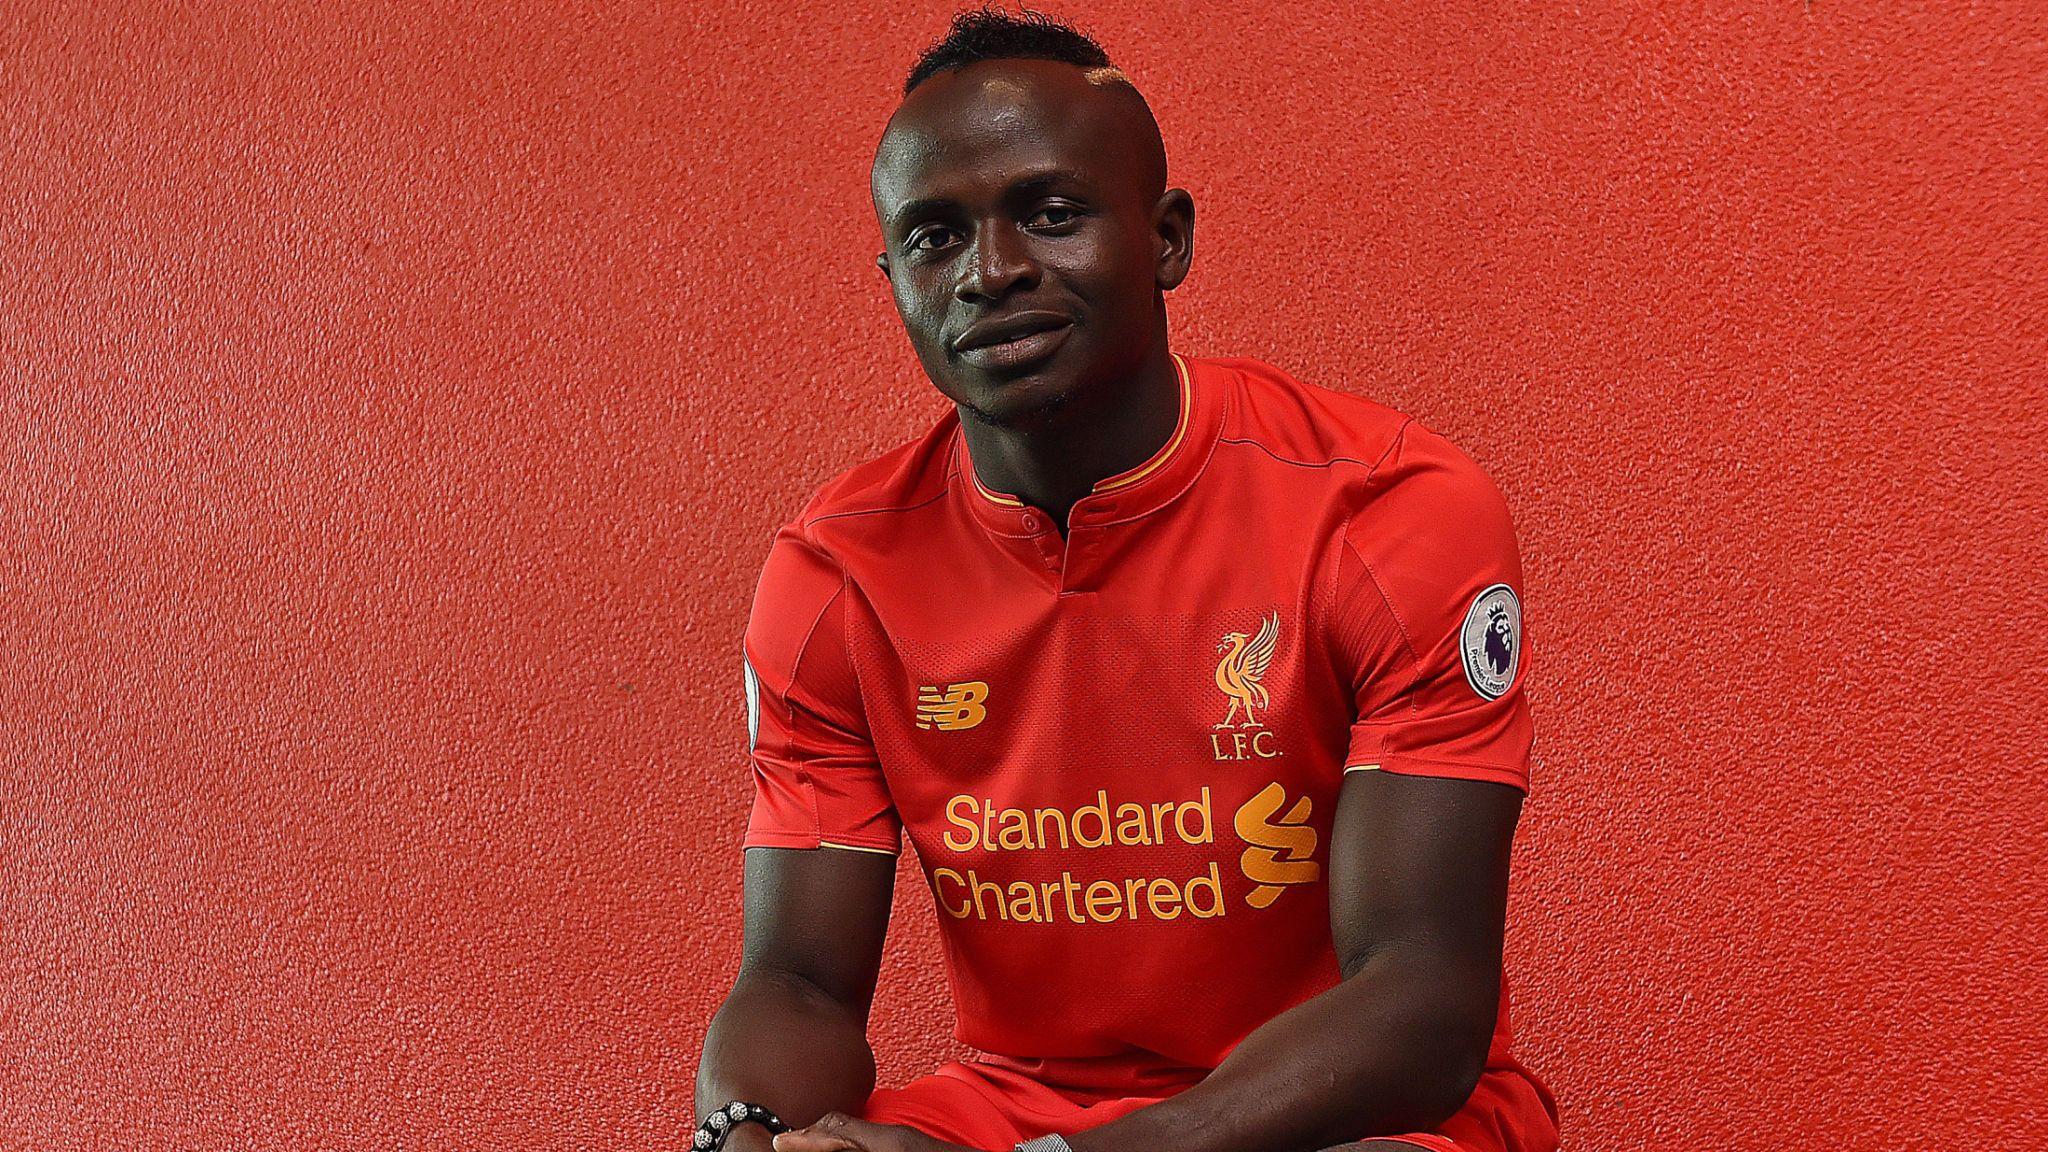 Liverpool Sign Sadio Mané From Southampton. The Sports Journal